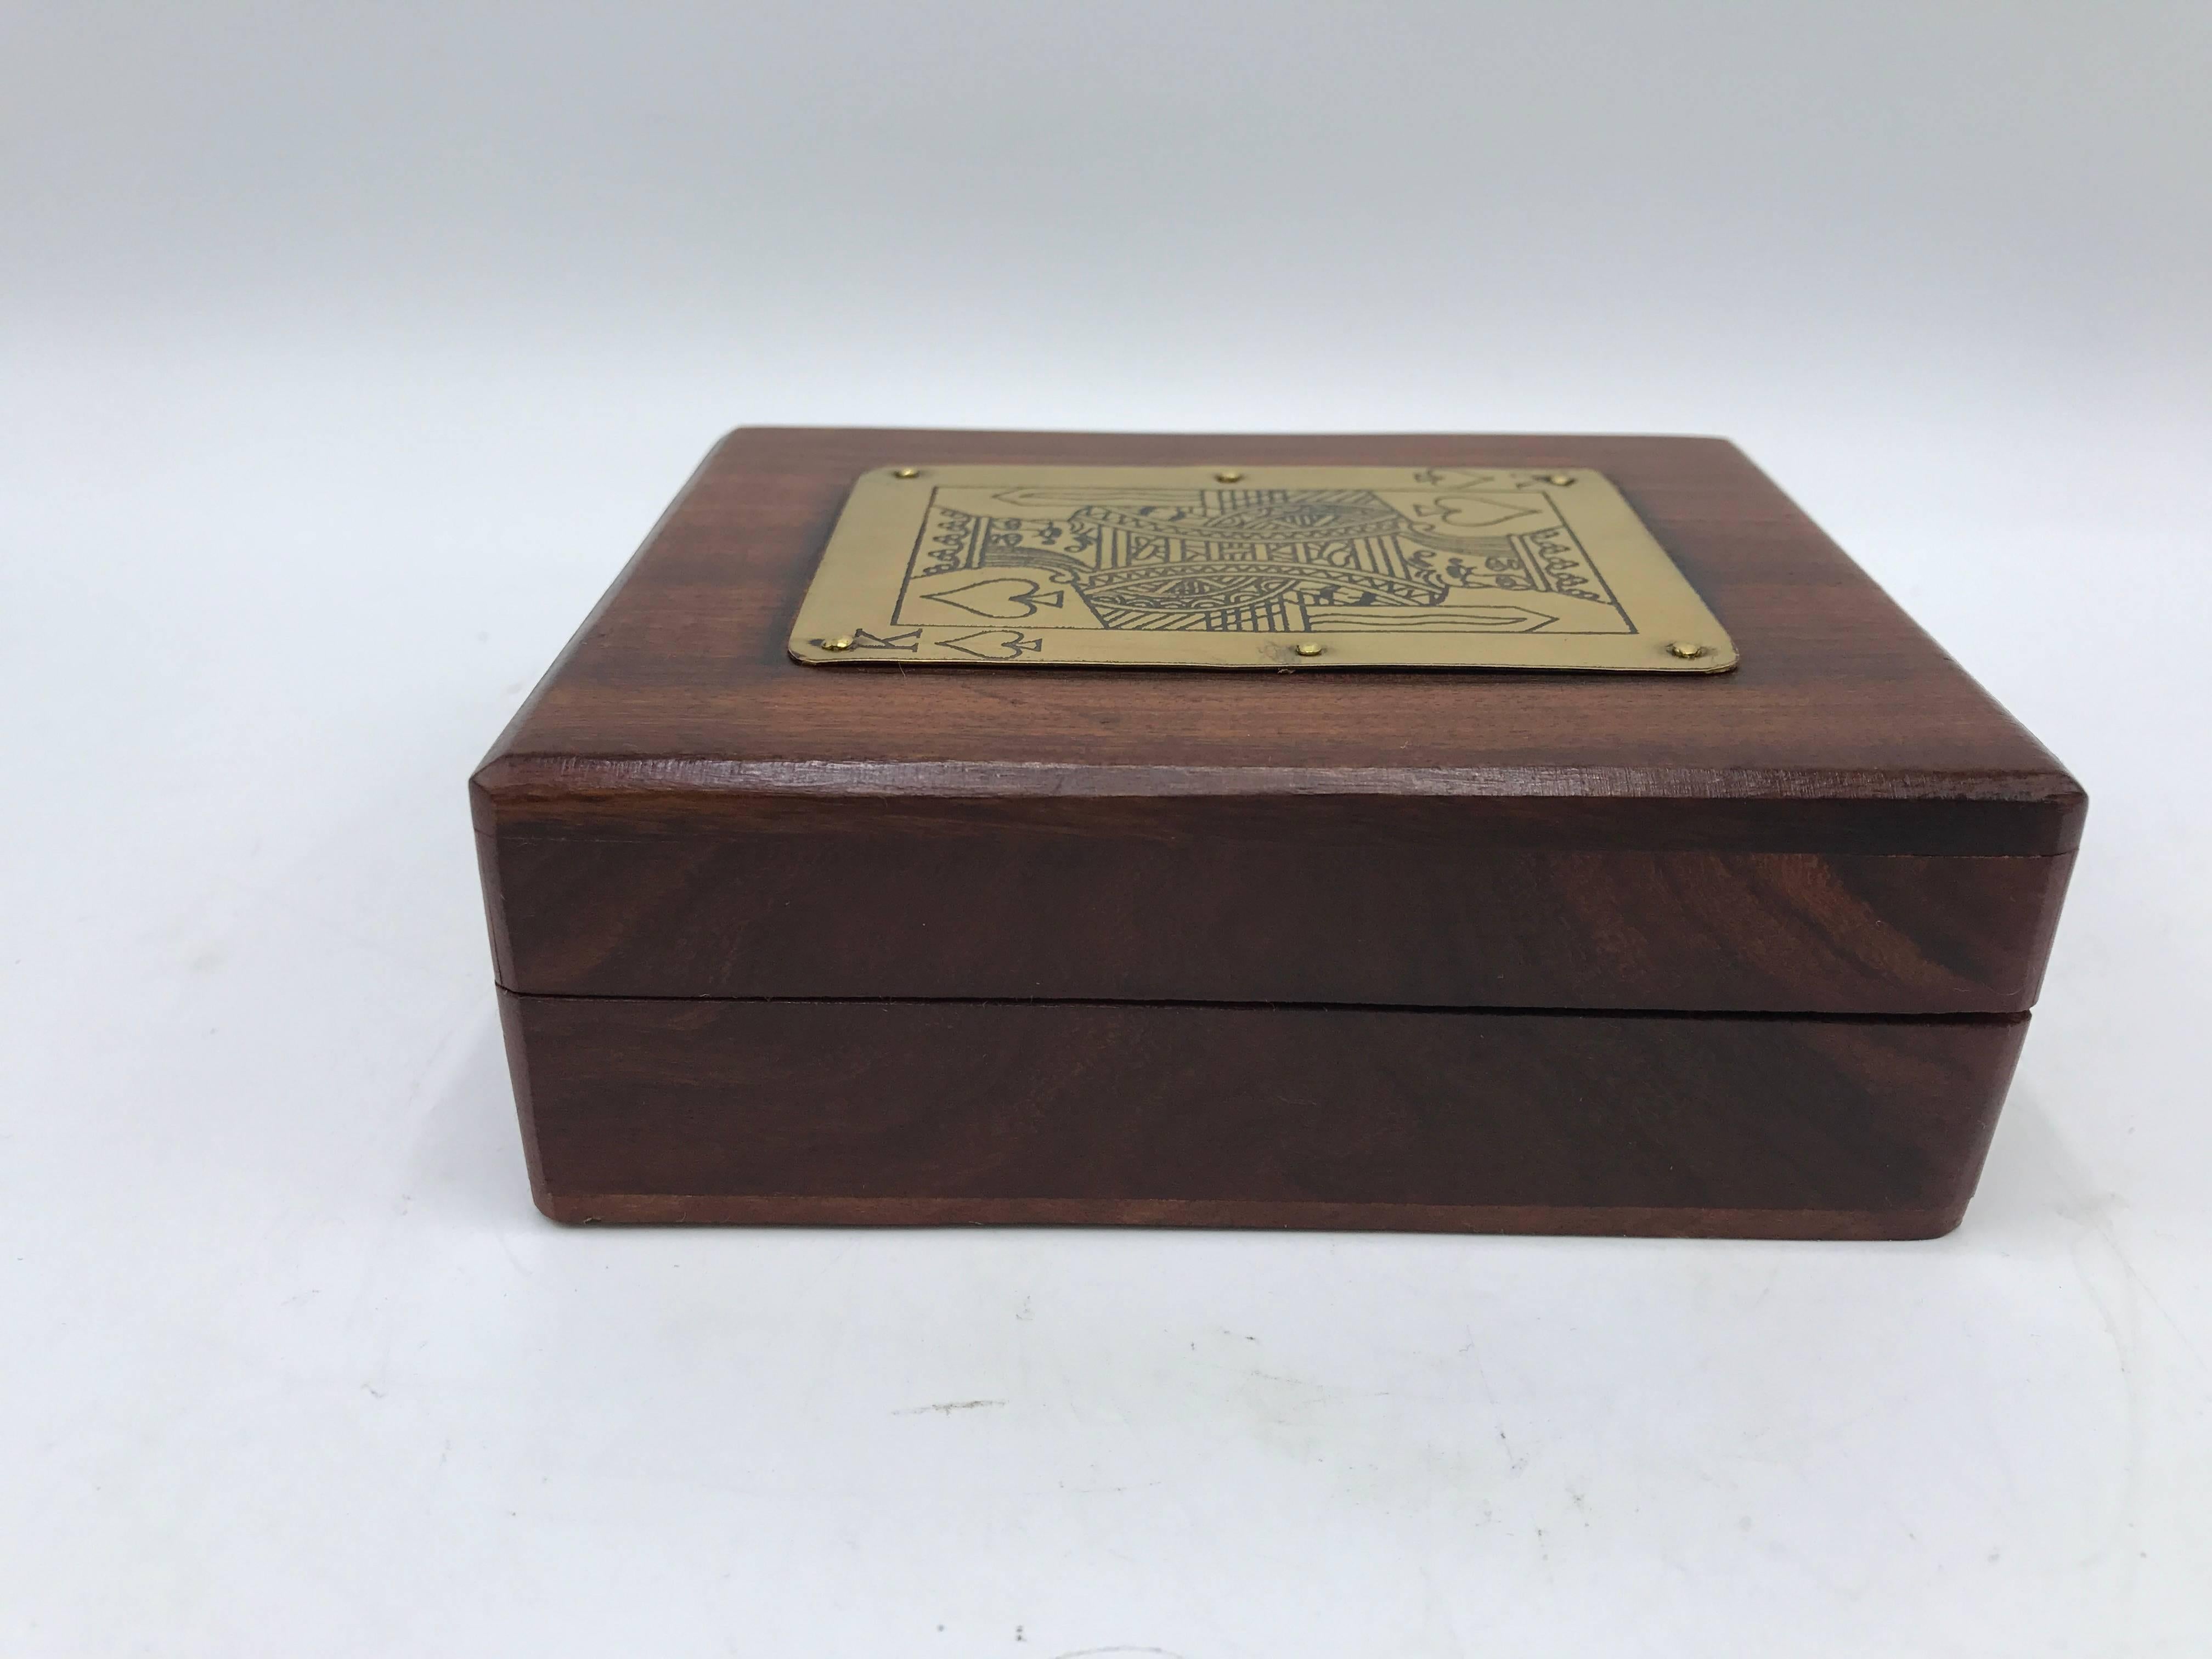 Modern 1960s, Walnut and Brass 'King of Hearts' Playing Card Box with Deck of Cards